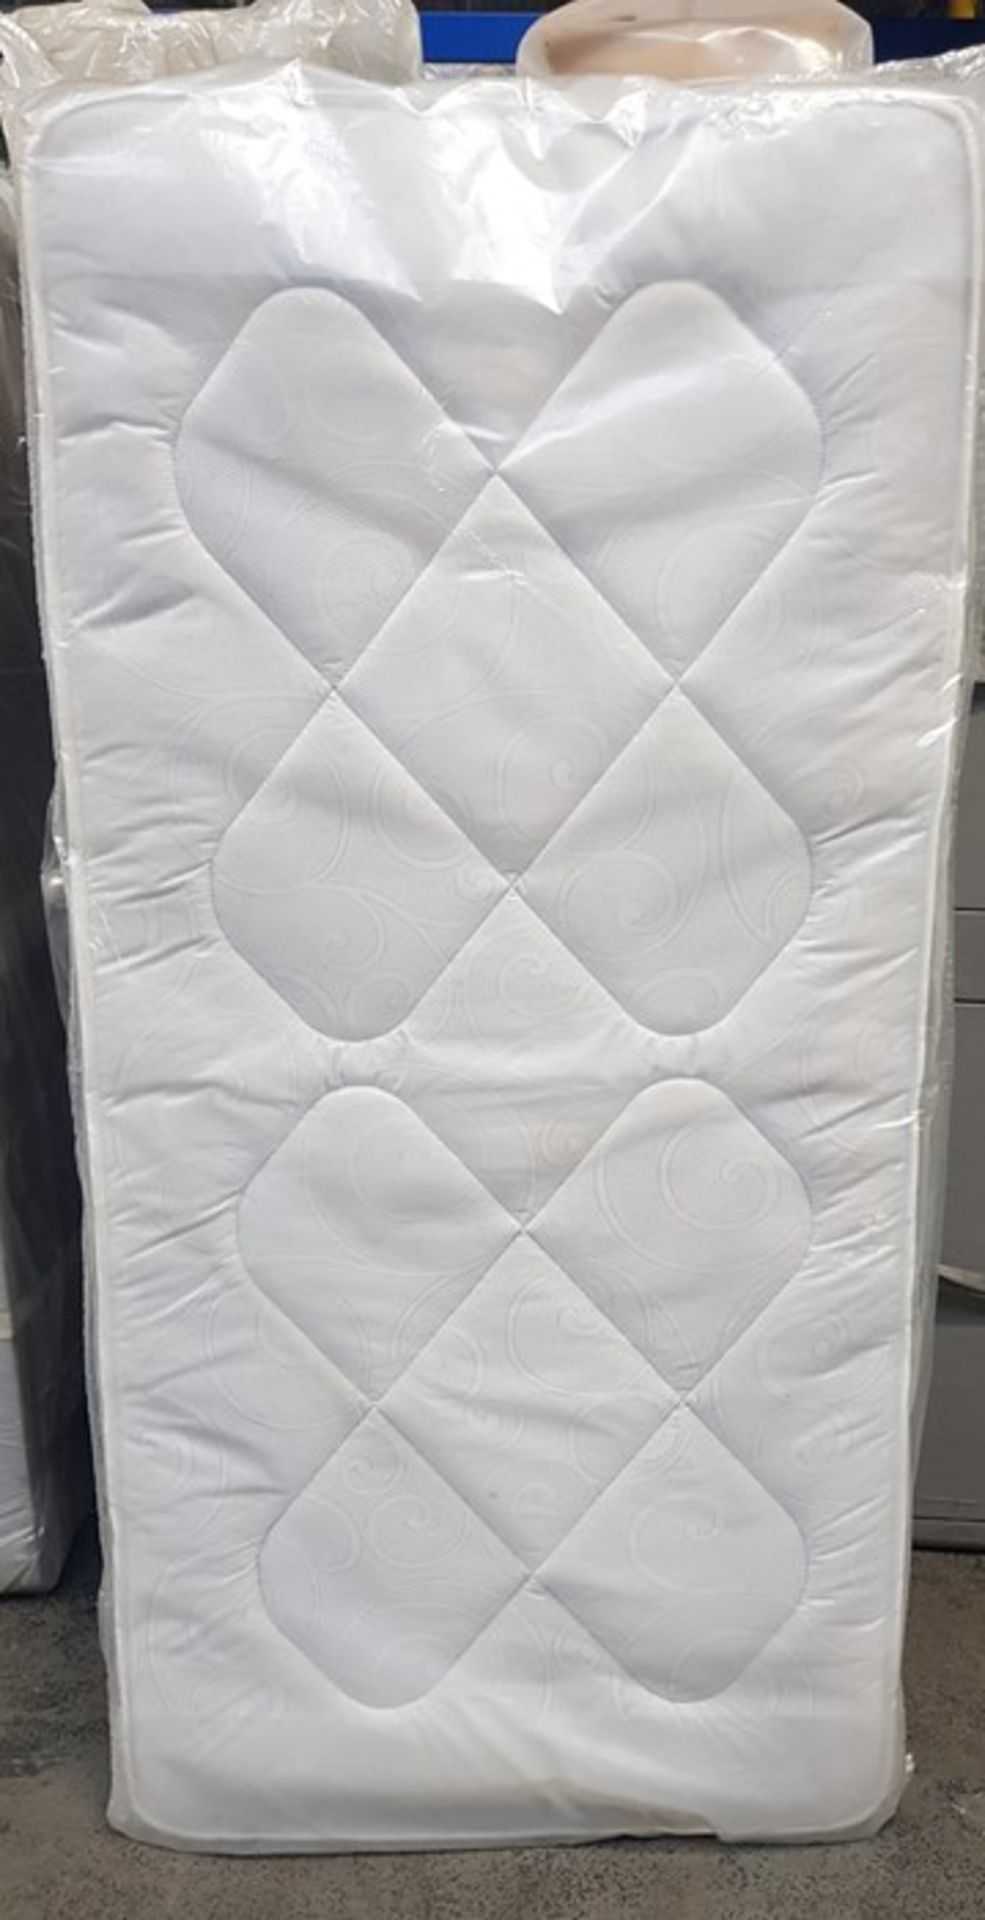 1 BAGGED 90CM SINGLE POCKET SPRUNG MATTRESS / RRP £119.99 (PUBLIC VIEWING AVAILABLE)